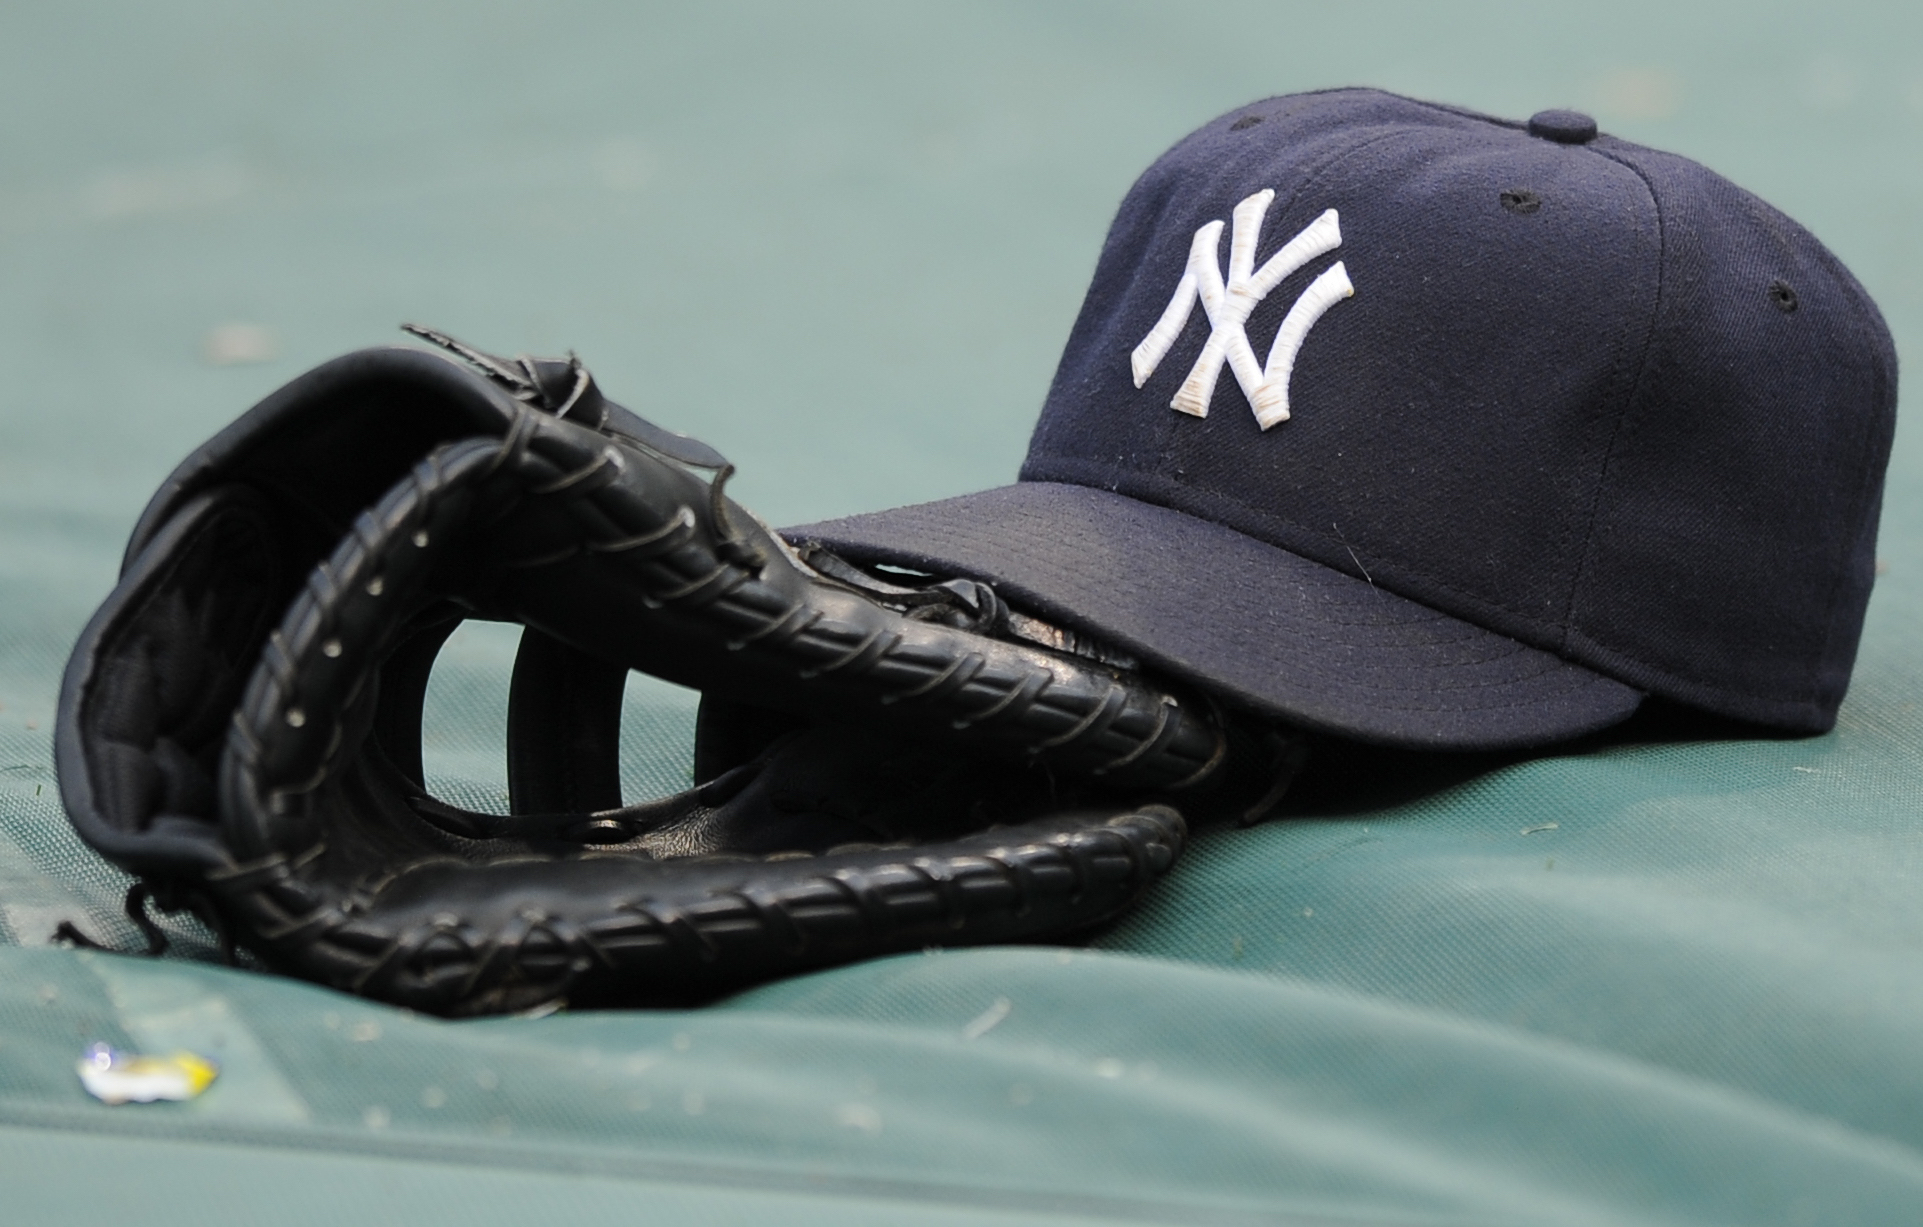 Why Yankees fans should be secretly rooting for a crash-and-burn